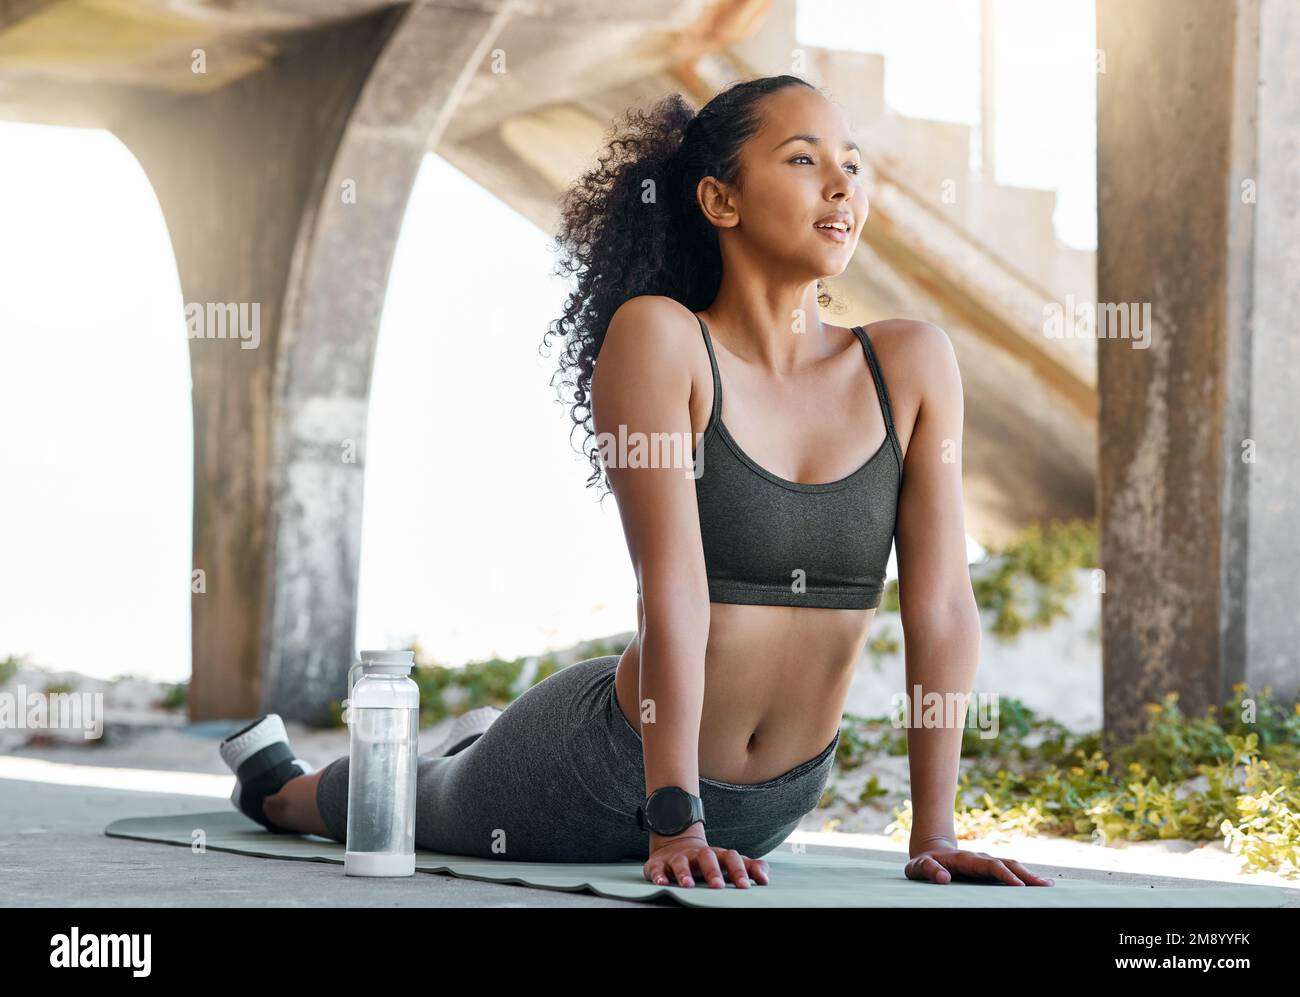 Releasing all that tension. Full length shot of an attractive young woman holding an upward facing dog pose while practicing yoga in the city. Stock Photo